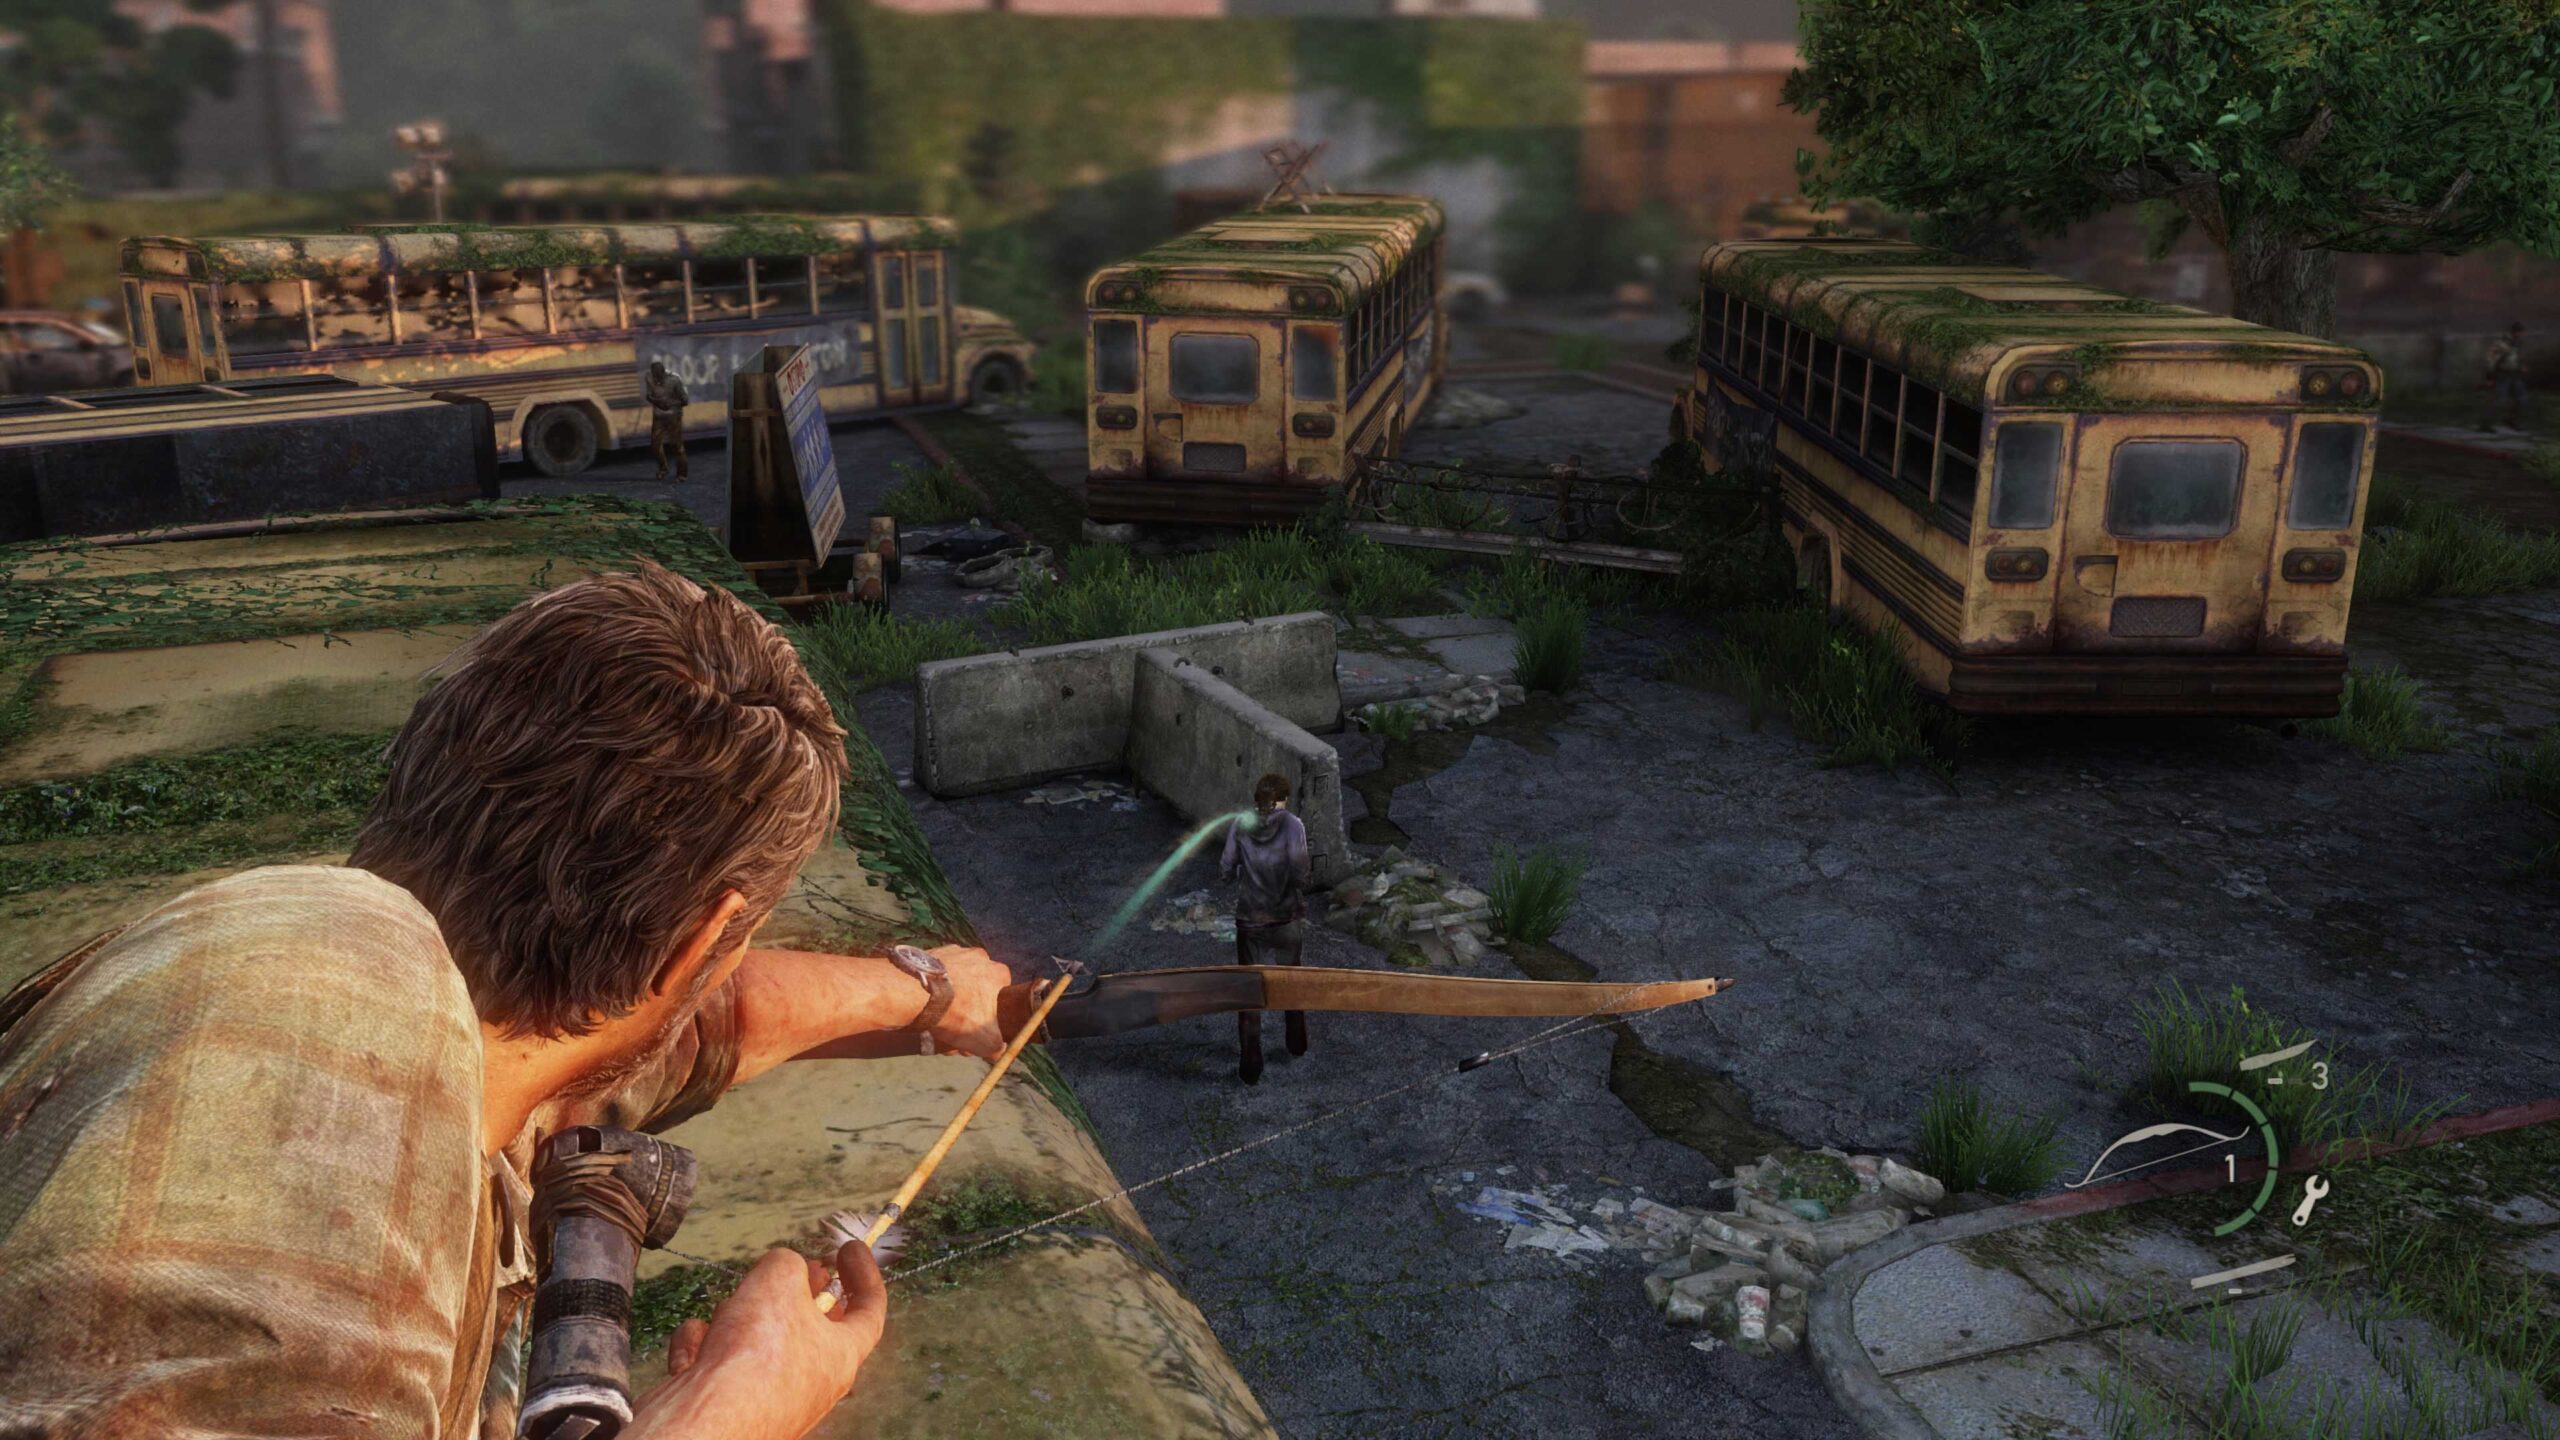 The Last of Us Remastered Review - GameSpot